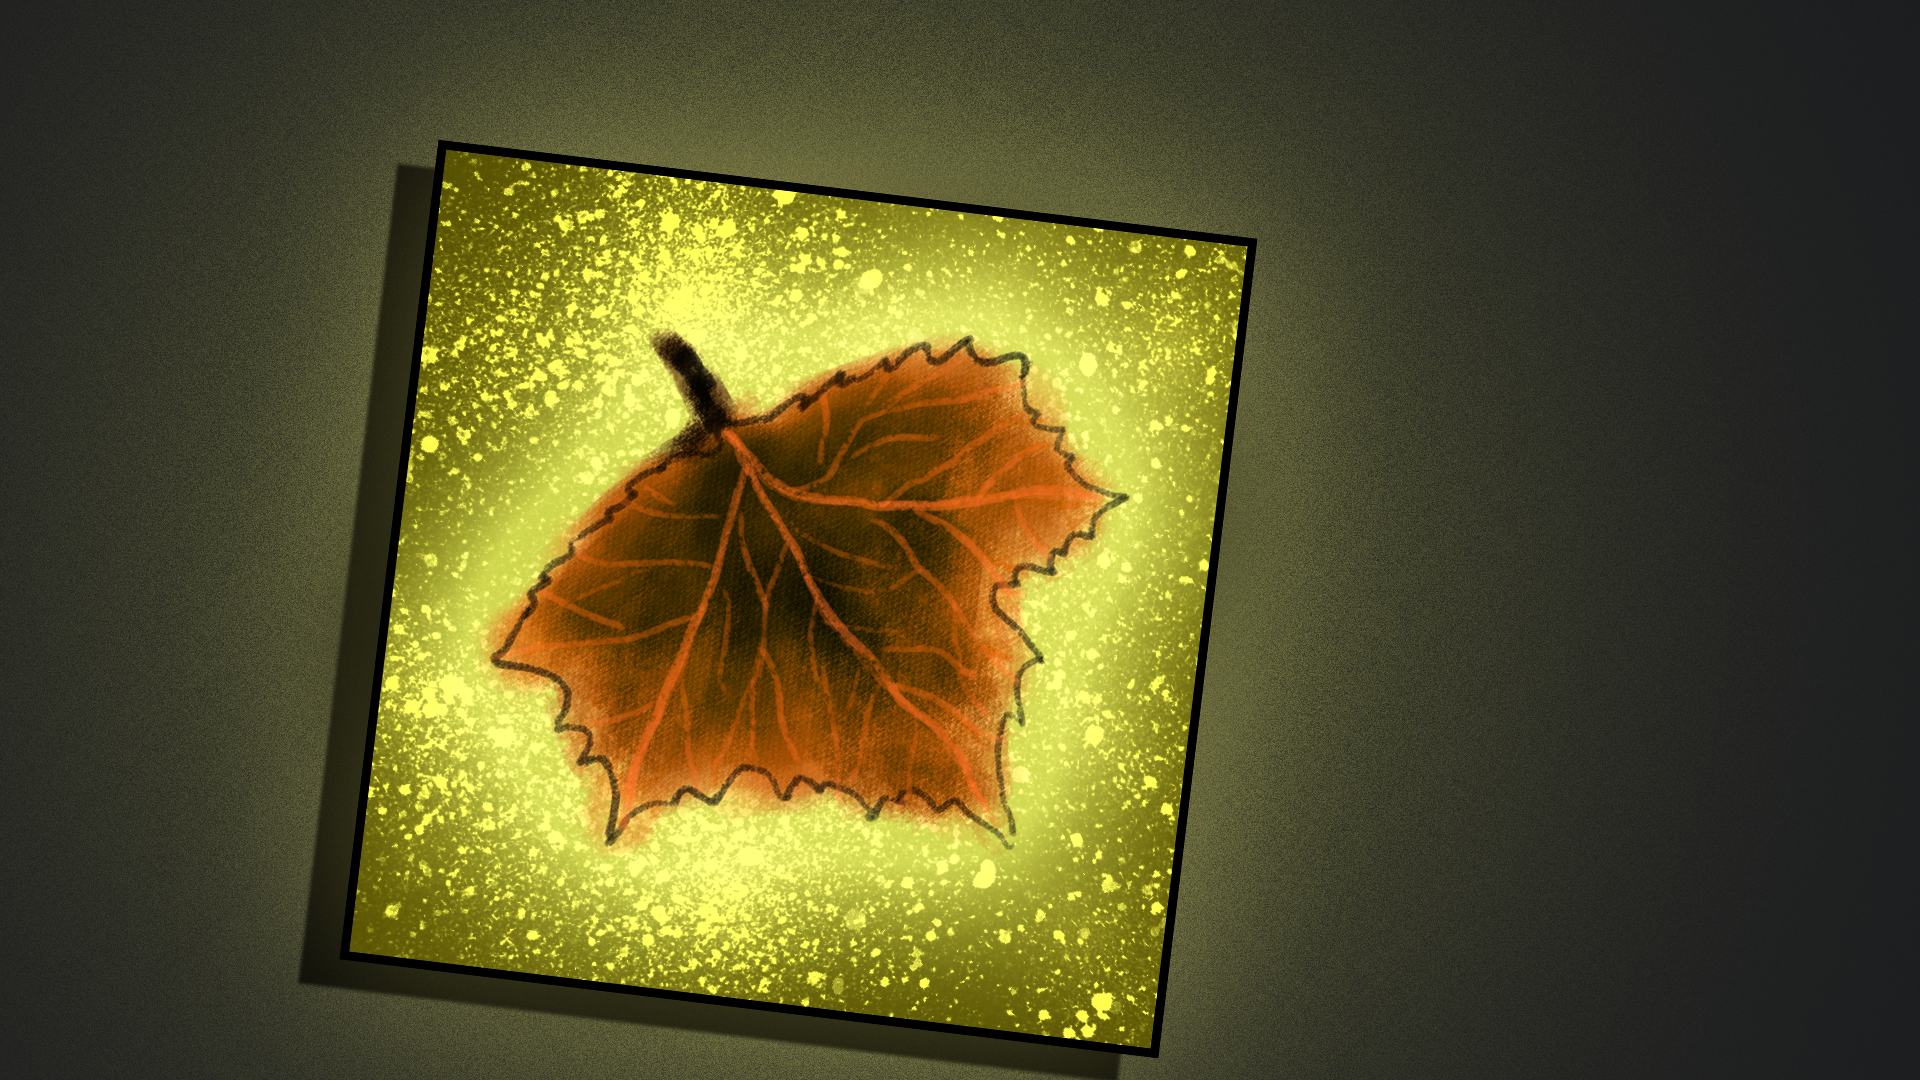 Icon for The Leaf of Autumn